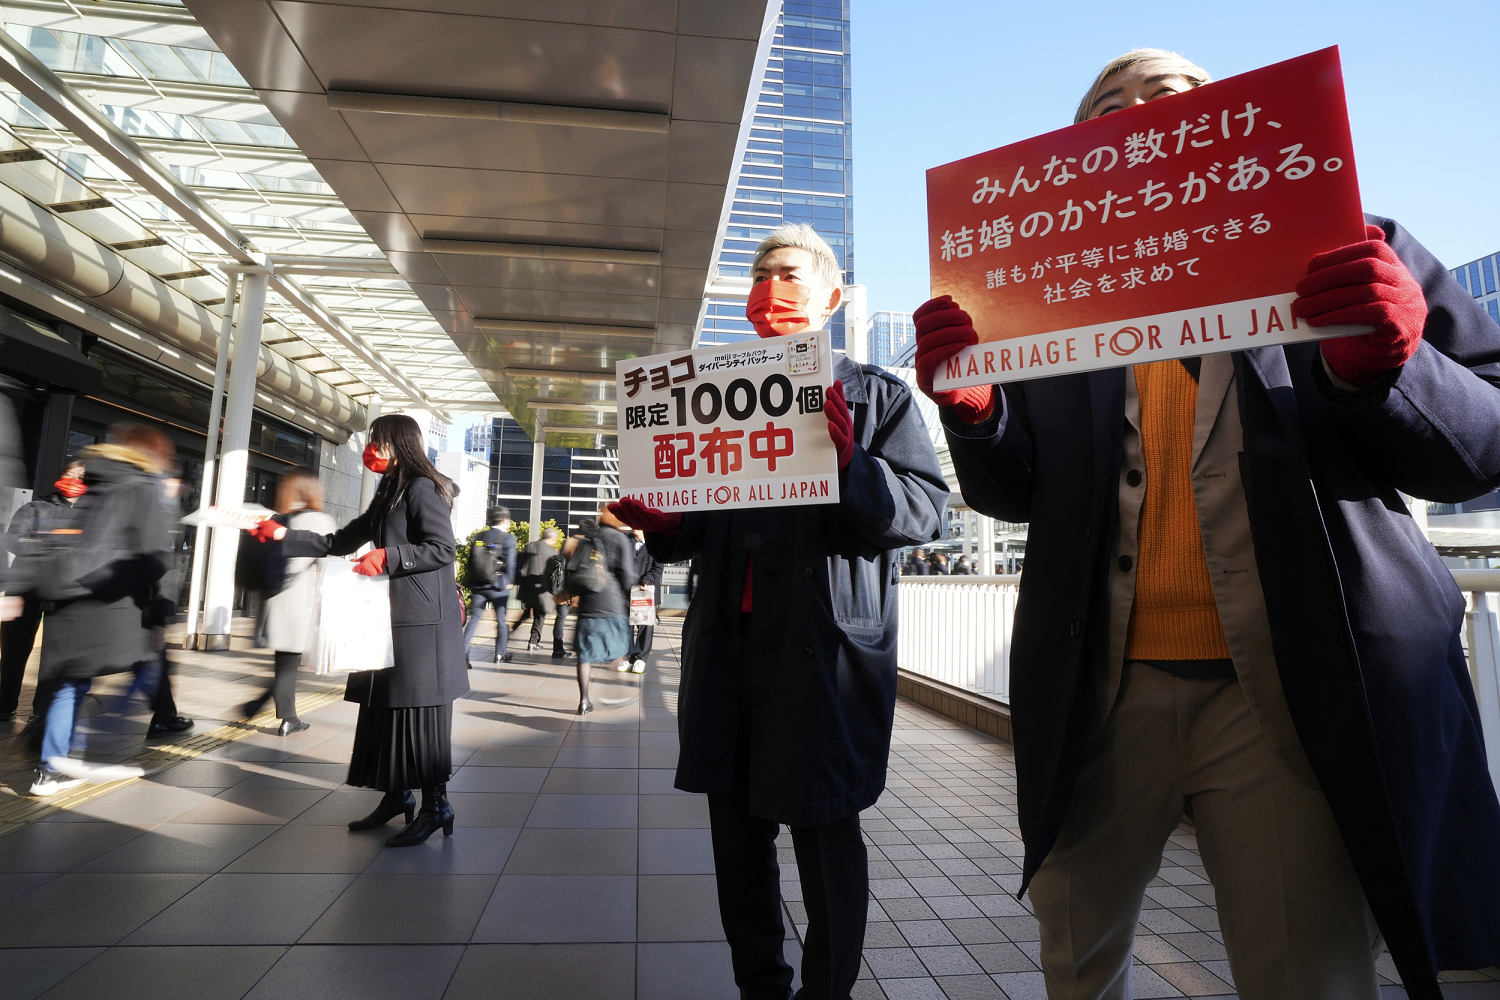 On Valentine's Day, LGBTQ activists in Japan call for same-sex marriage rights